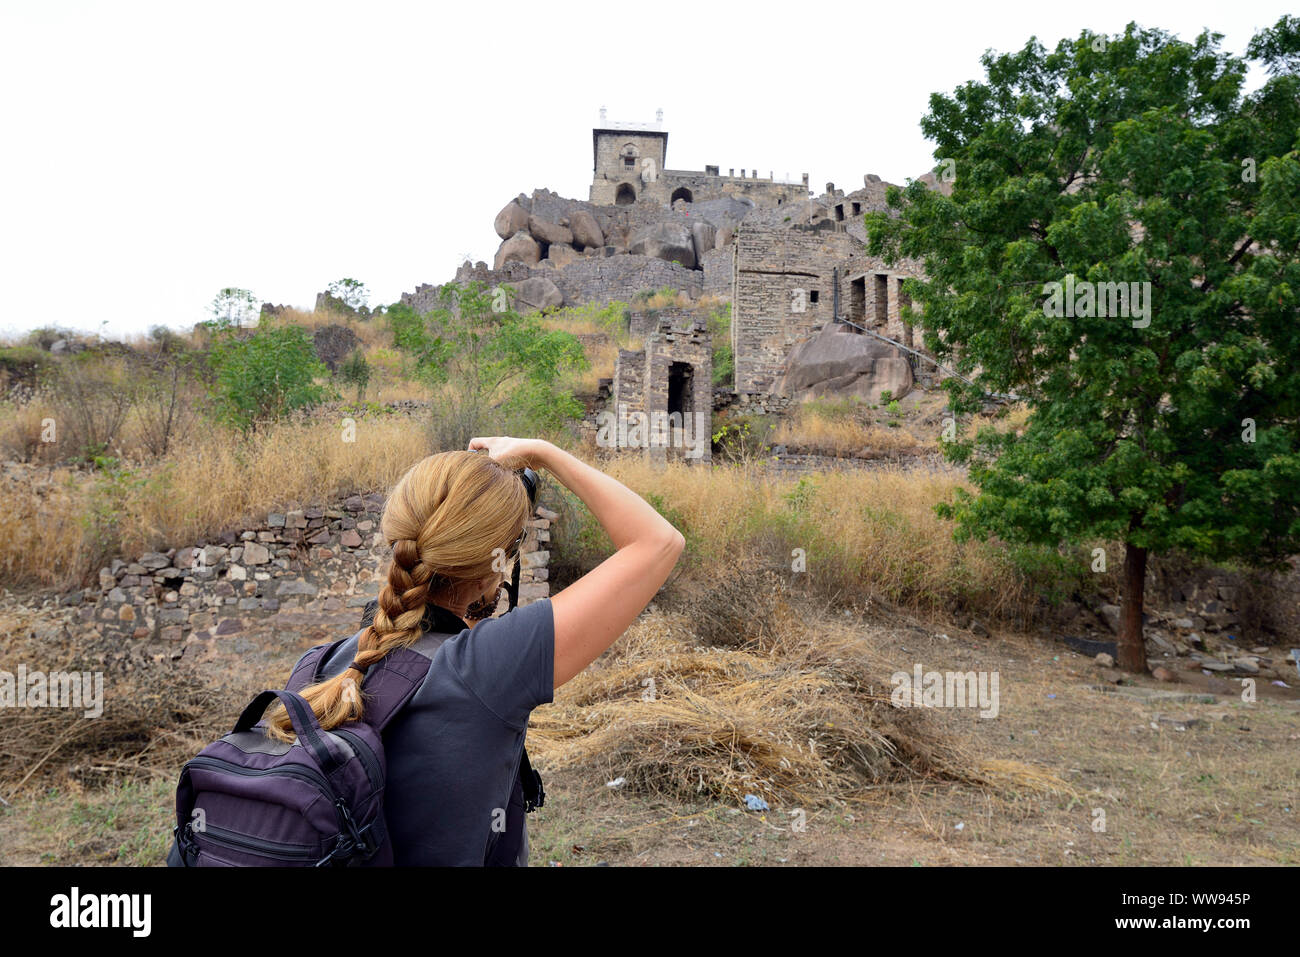 Tourist from Europe photographing Golconda Fort, also known as Golkonda or Golla Konda is a fortified citadel located in Hyderabad, India Stock Photo